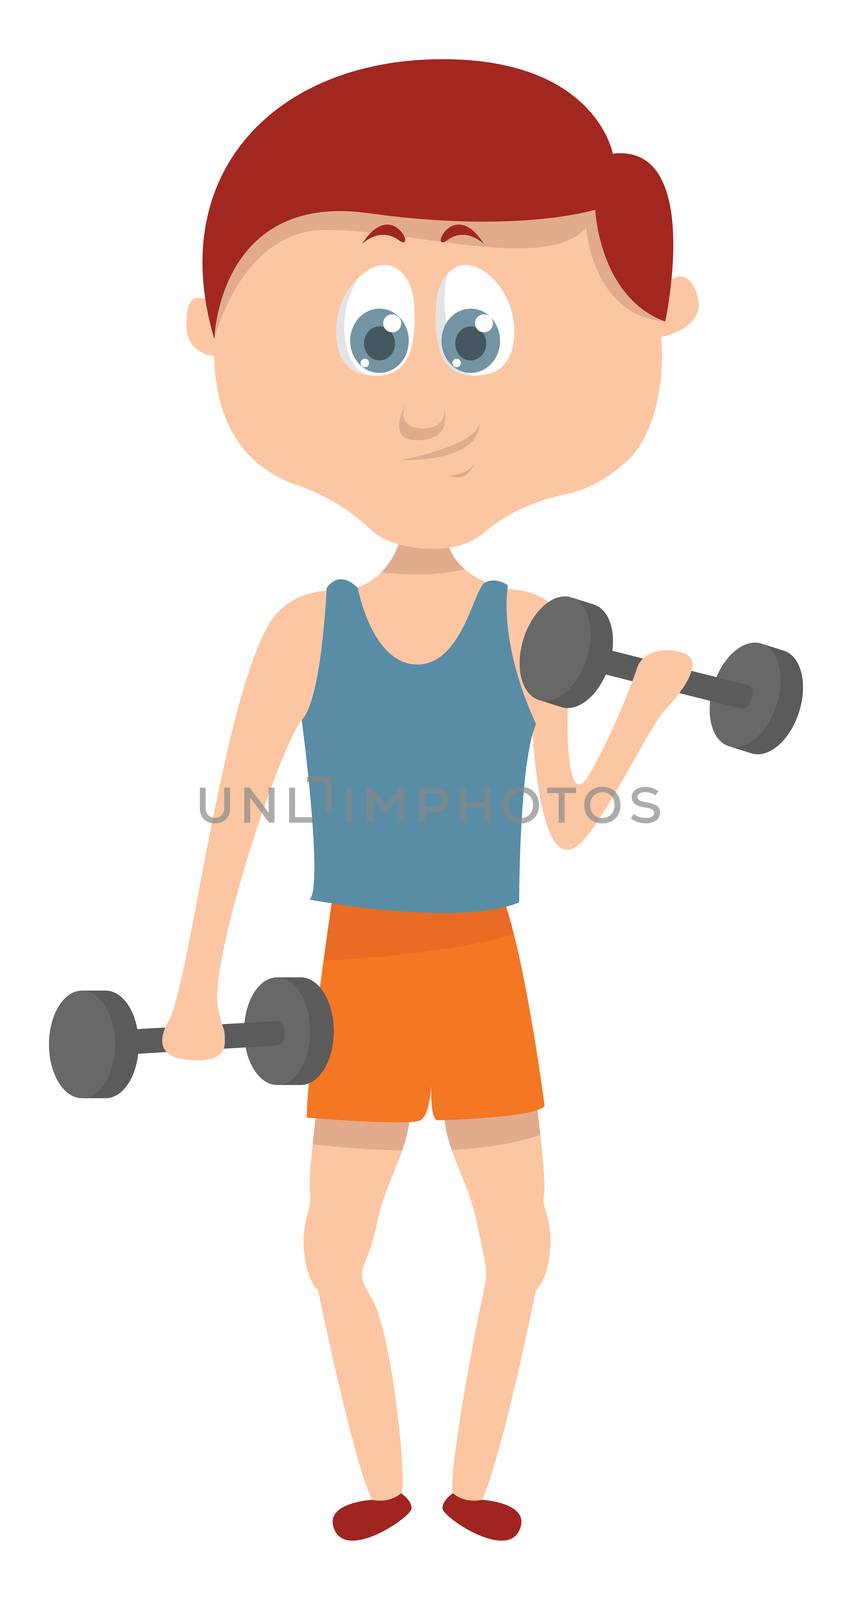 Man lifting weights , illustration, vector on white background